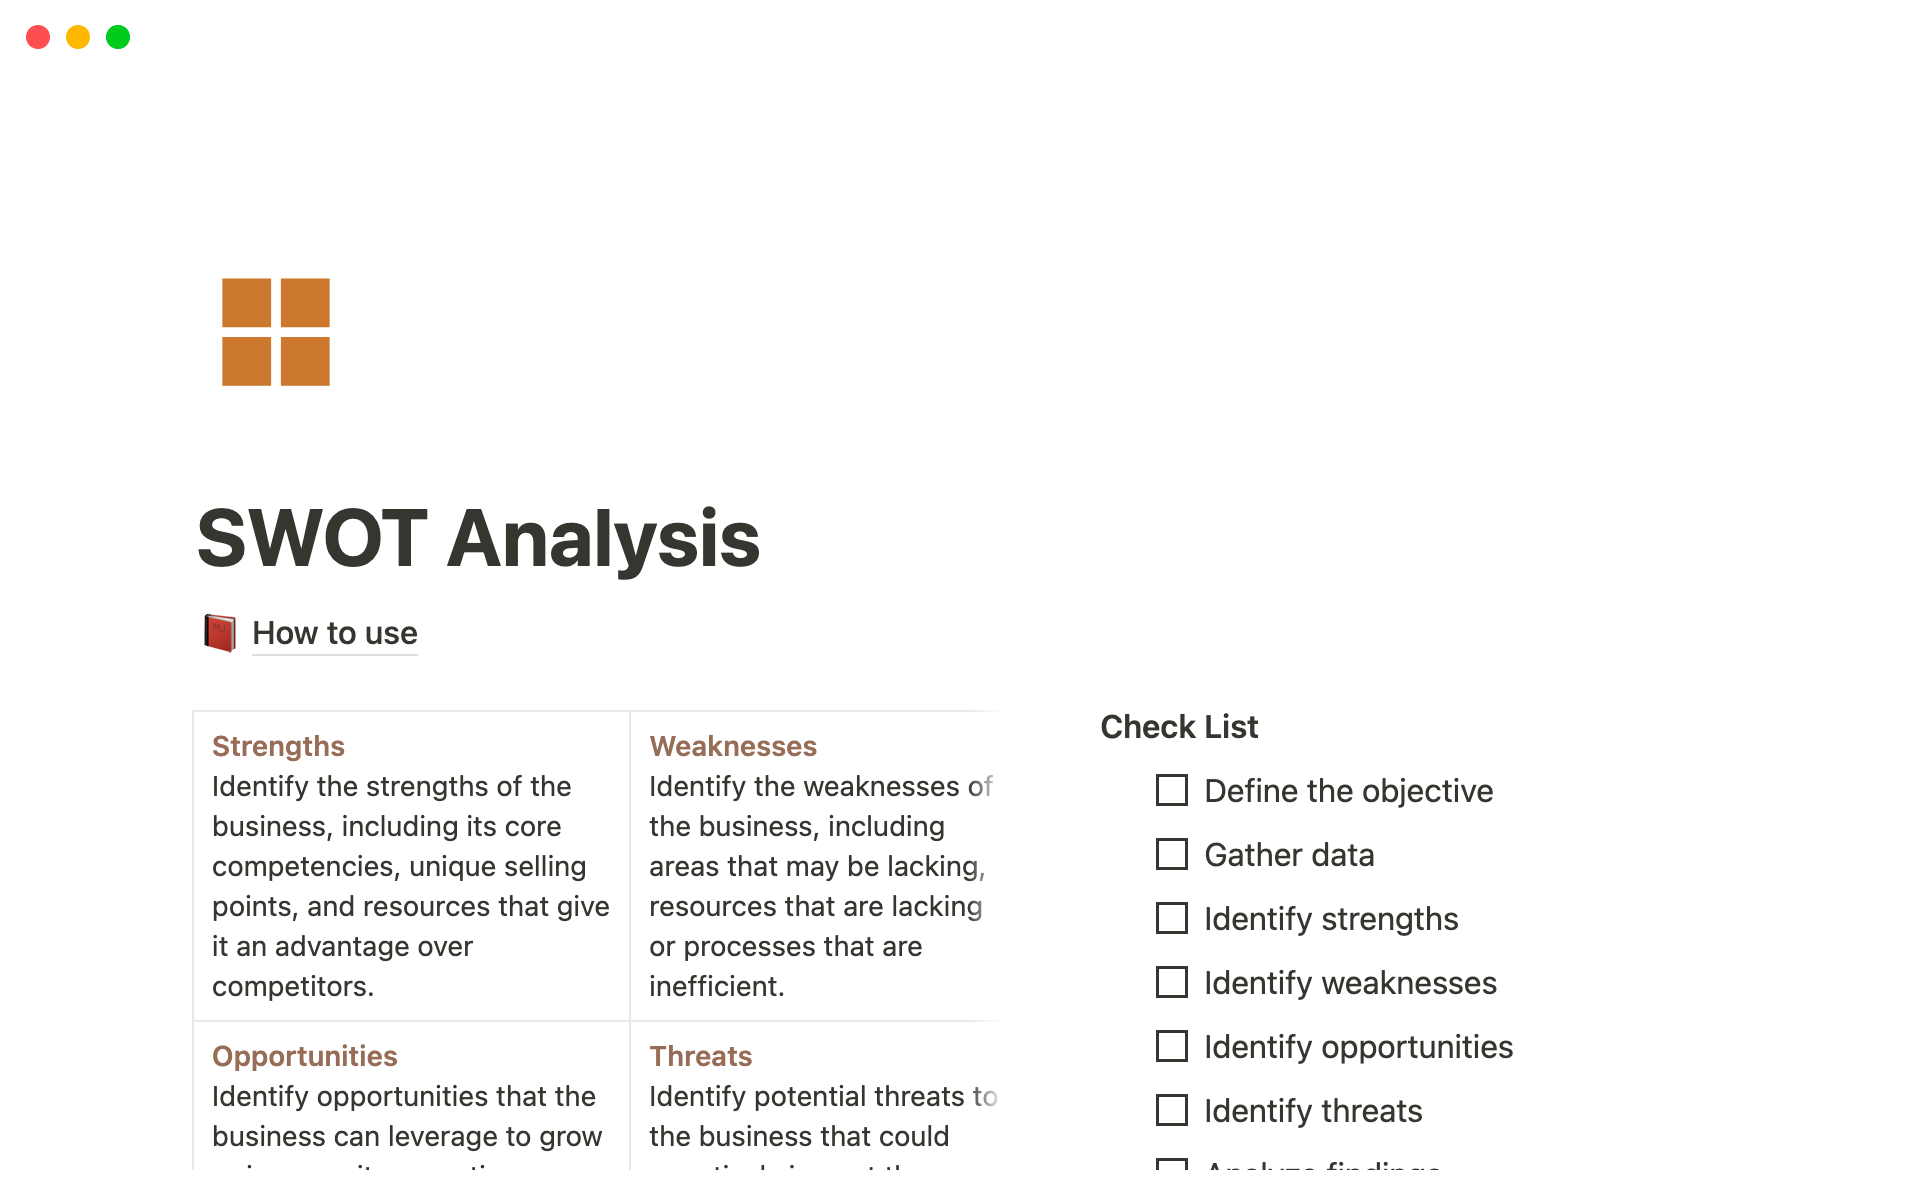 Save time when conducting a SWOT analysis